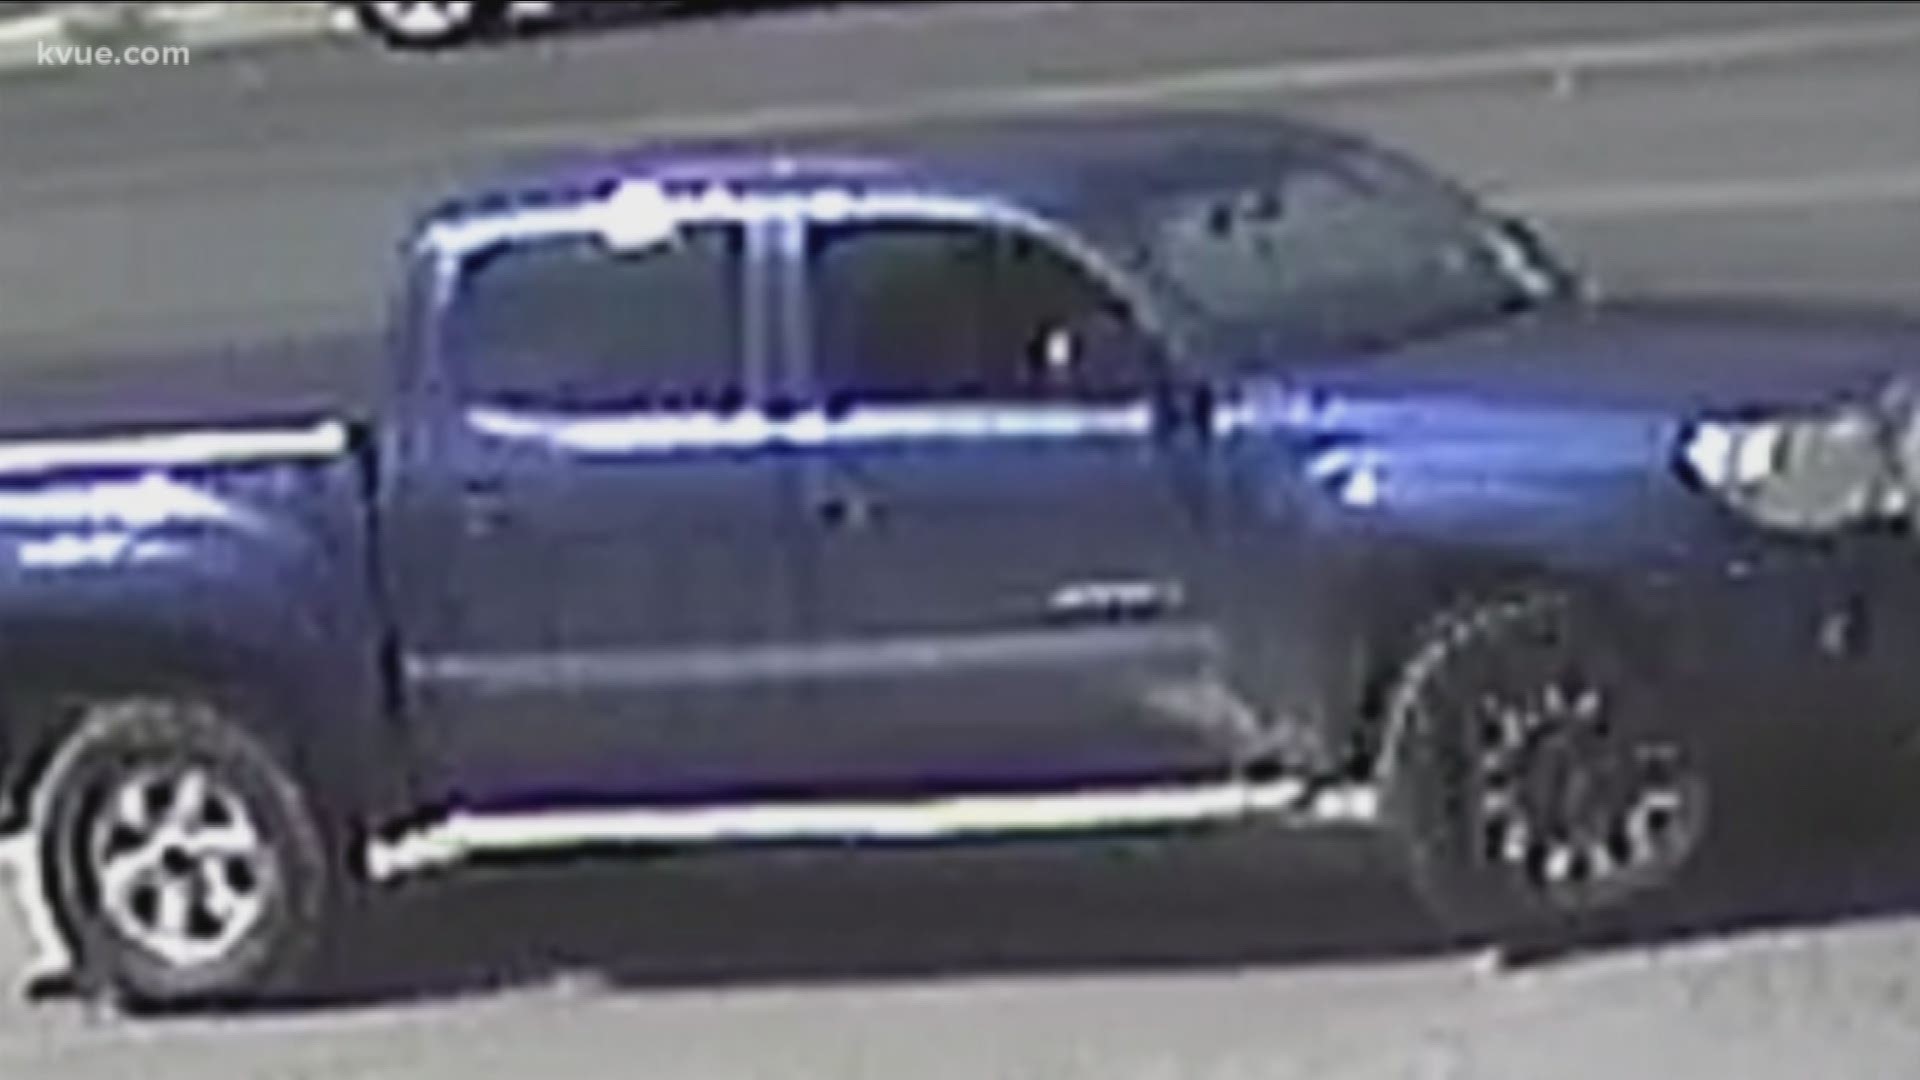 Austin police are looking for a truck involved in a possible kidnapping in North Austin on Wednesday.